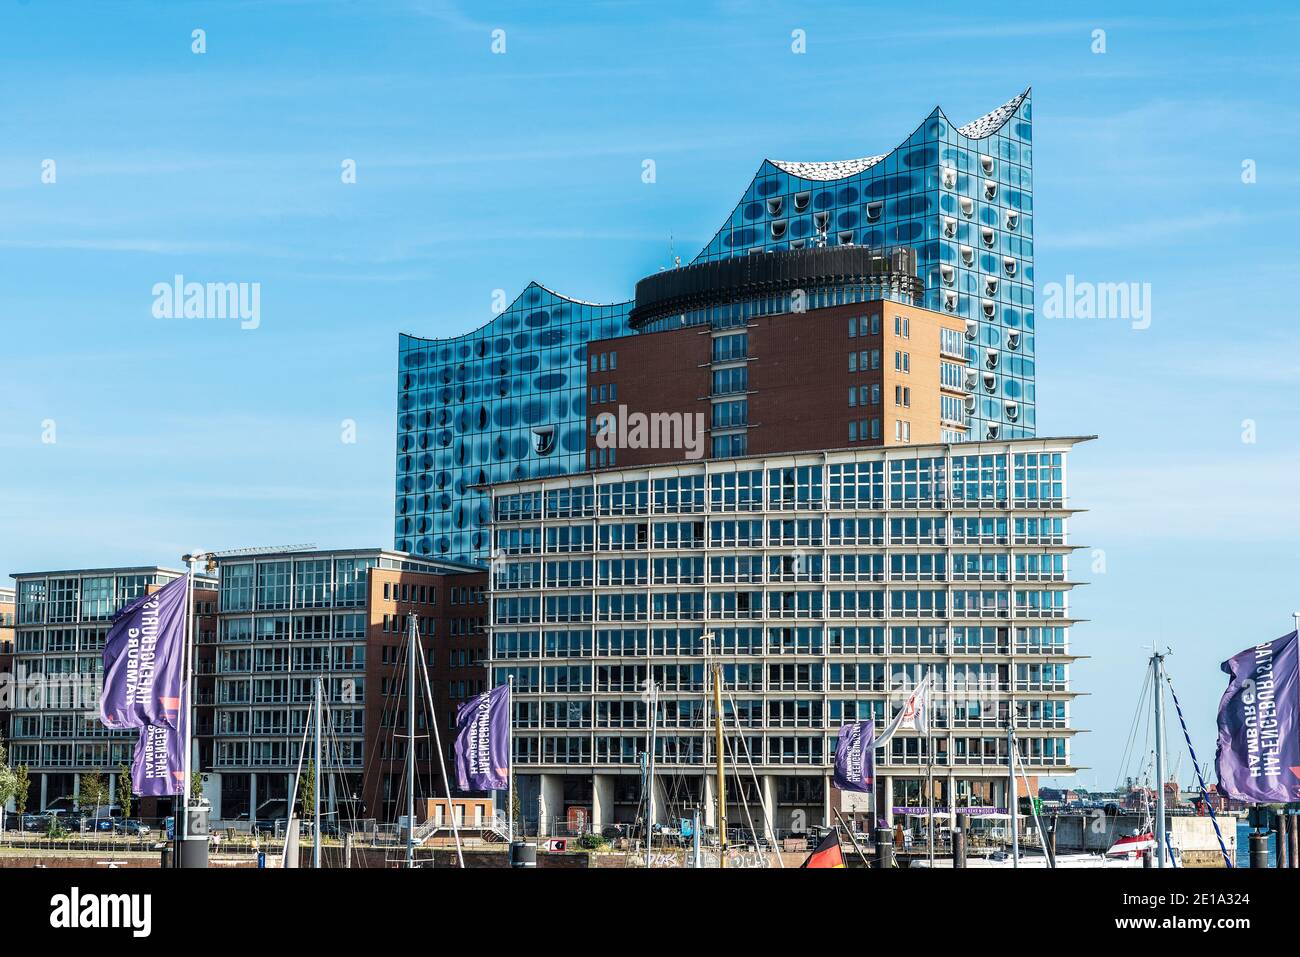 Hamburg, Germany - August 22, 2019: View of the Hanseatic Trade Center (HTC), Columbus Haus and the Elbphilharmonie (Elbe Philharmonic Hall) in HafenC Stock Photo